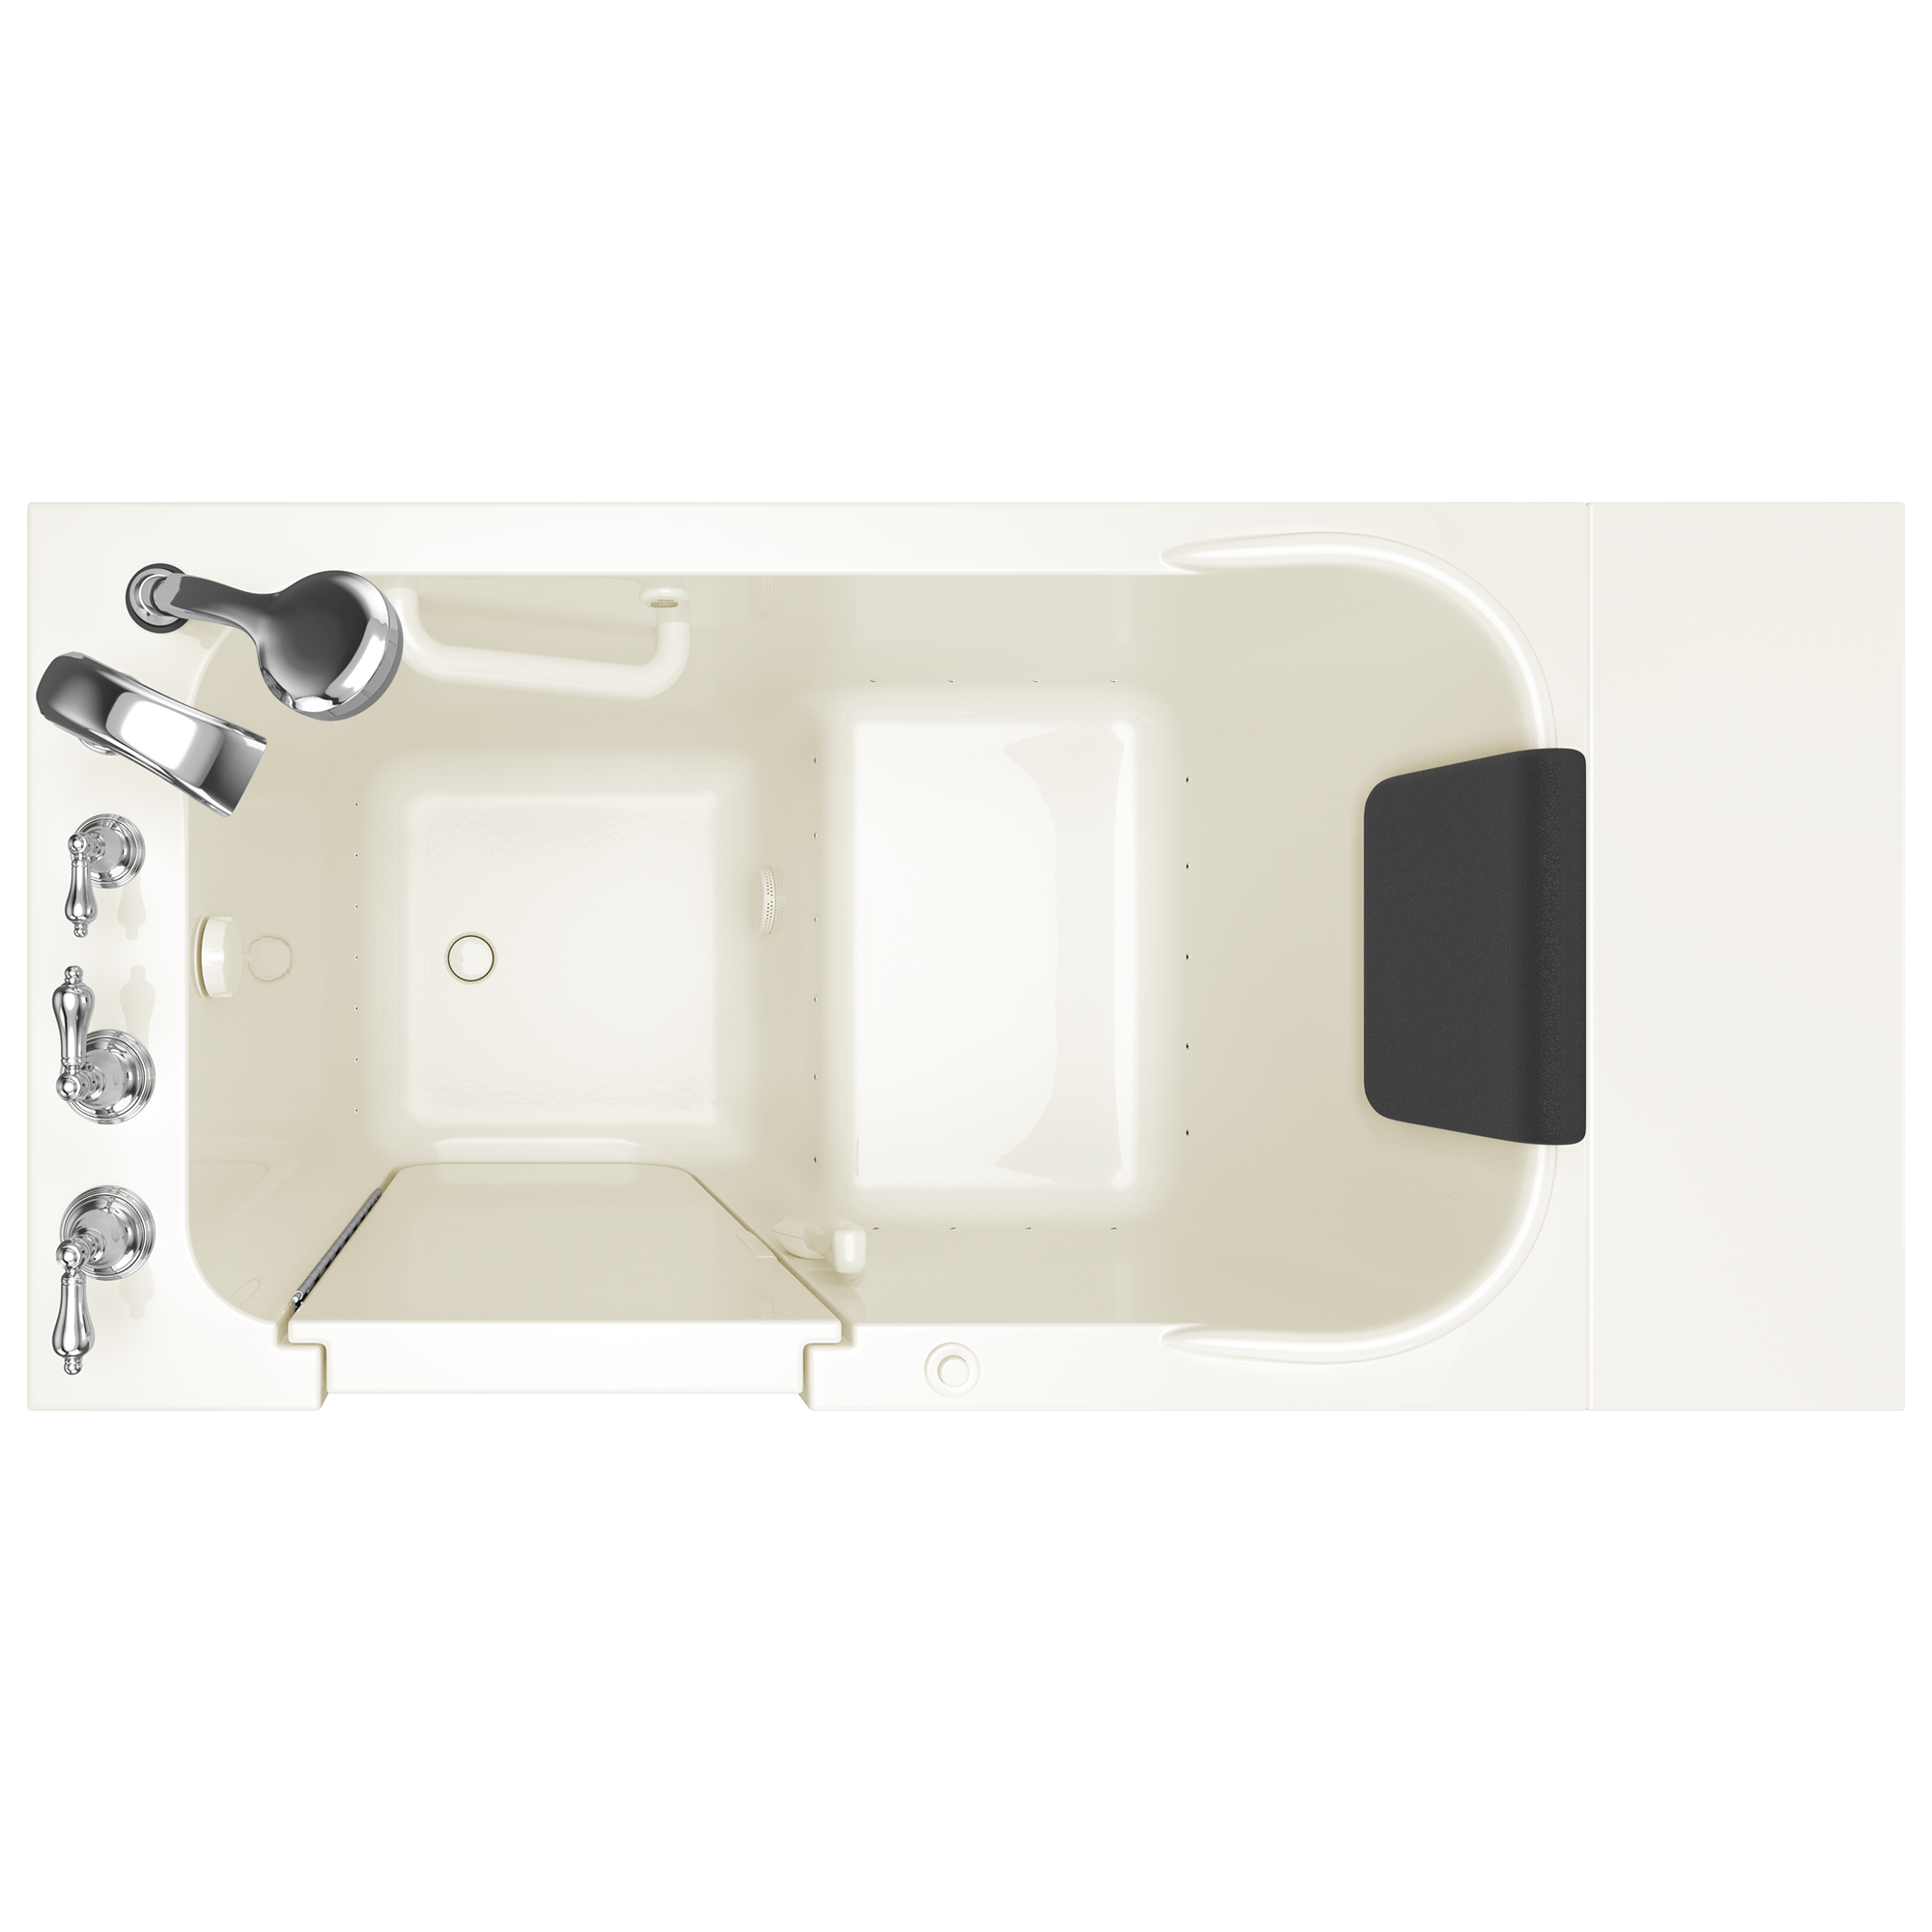 Gelcoat Premium Series 28 x 48-Inch Walk-in Tub With Air Spa System - Left-Hand Drain With Faucet